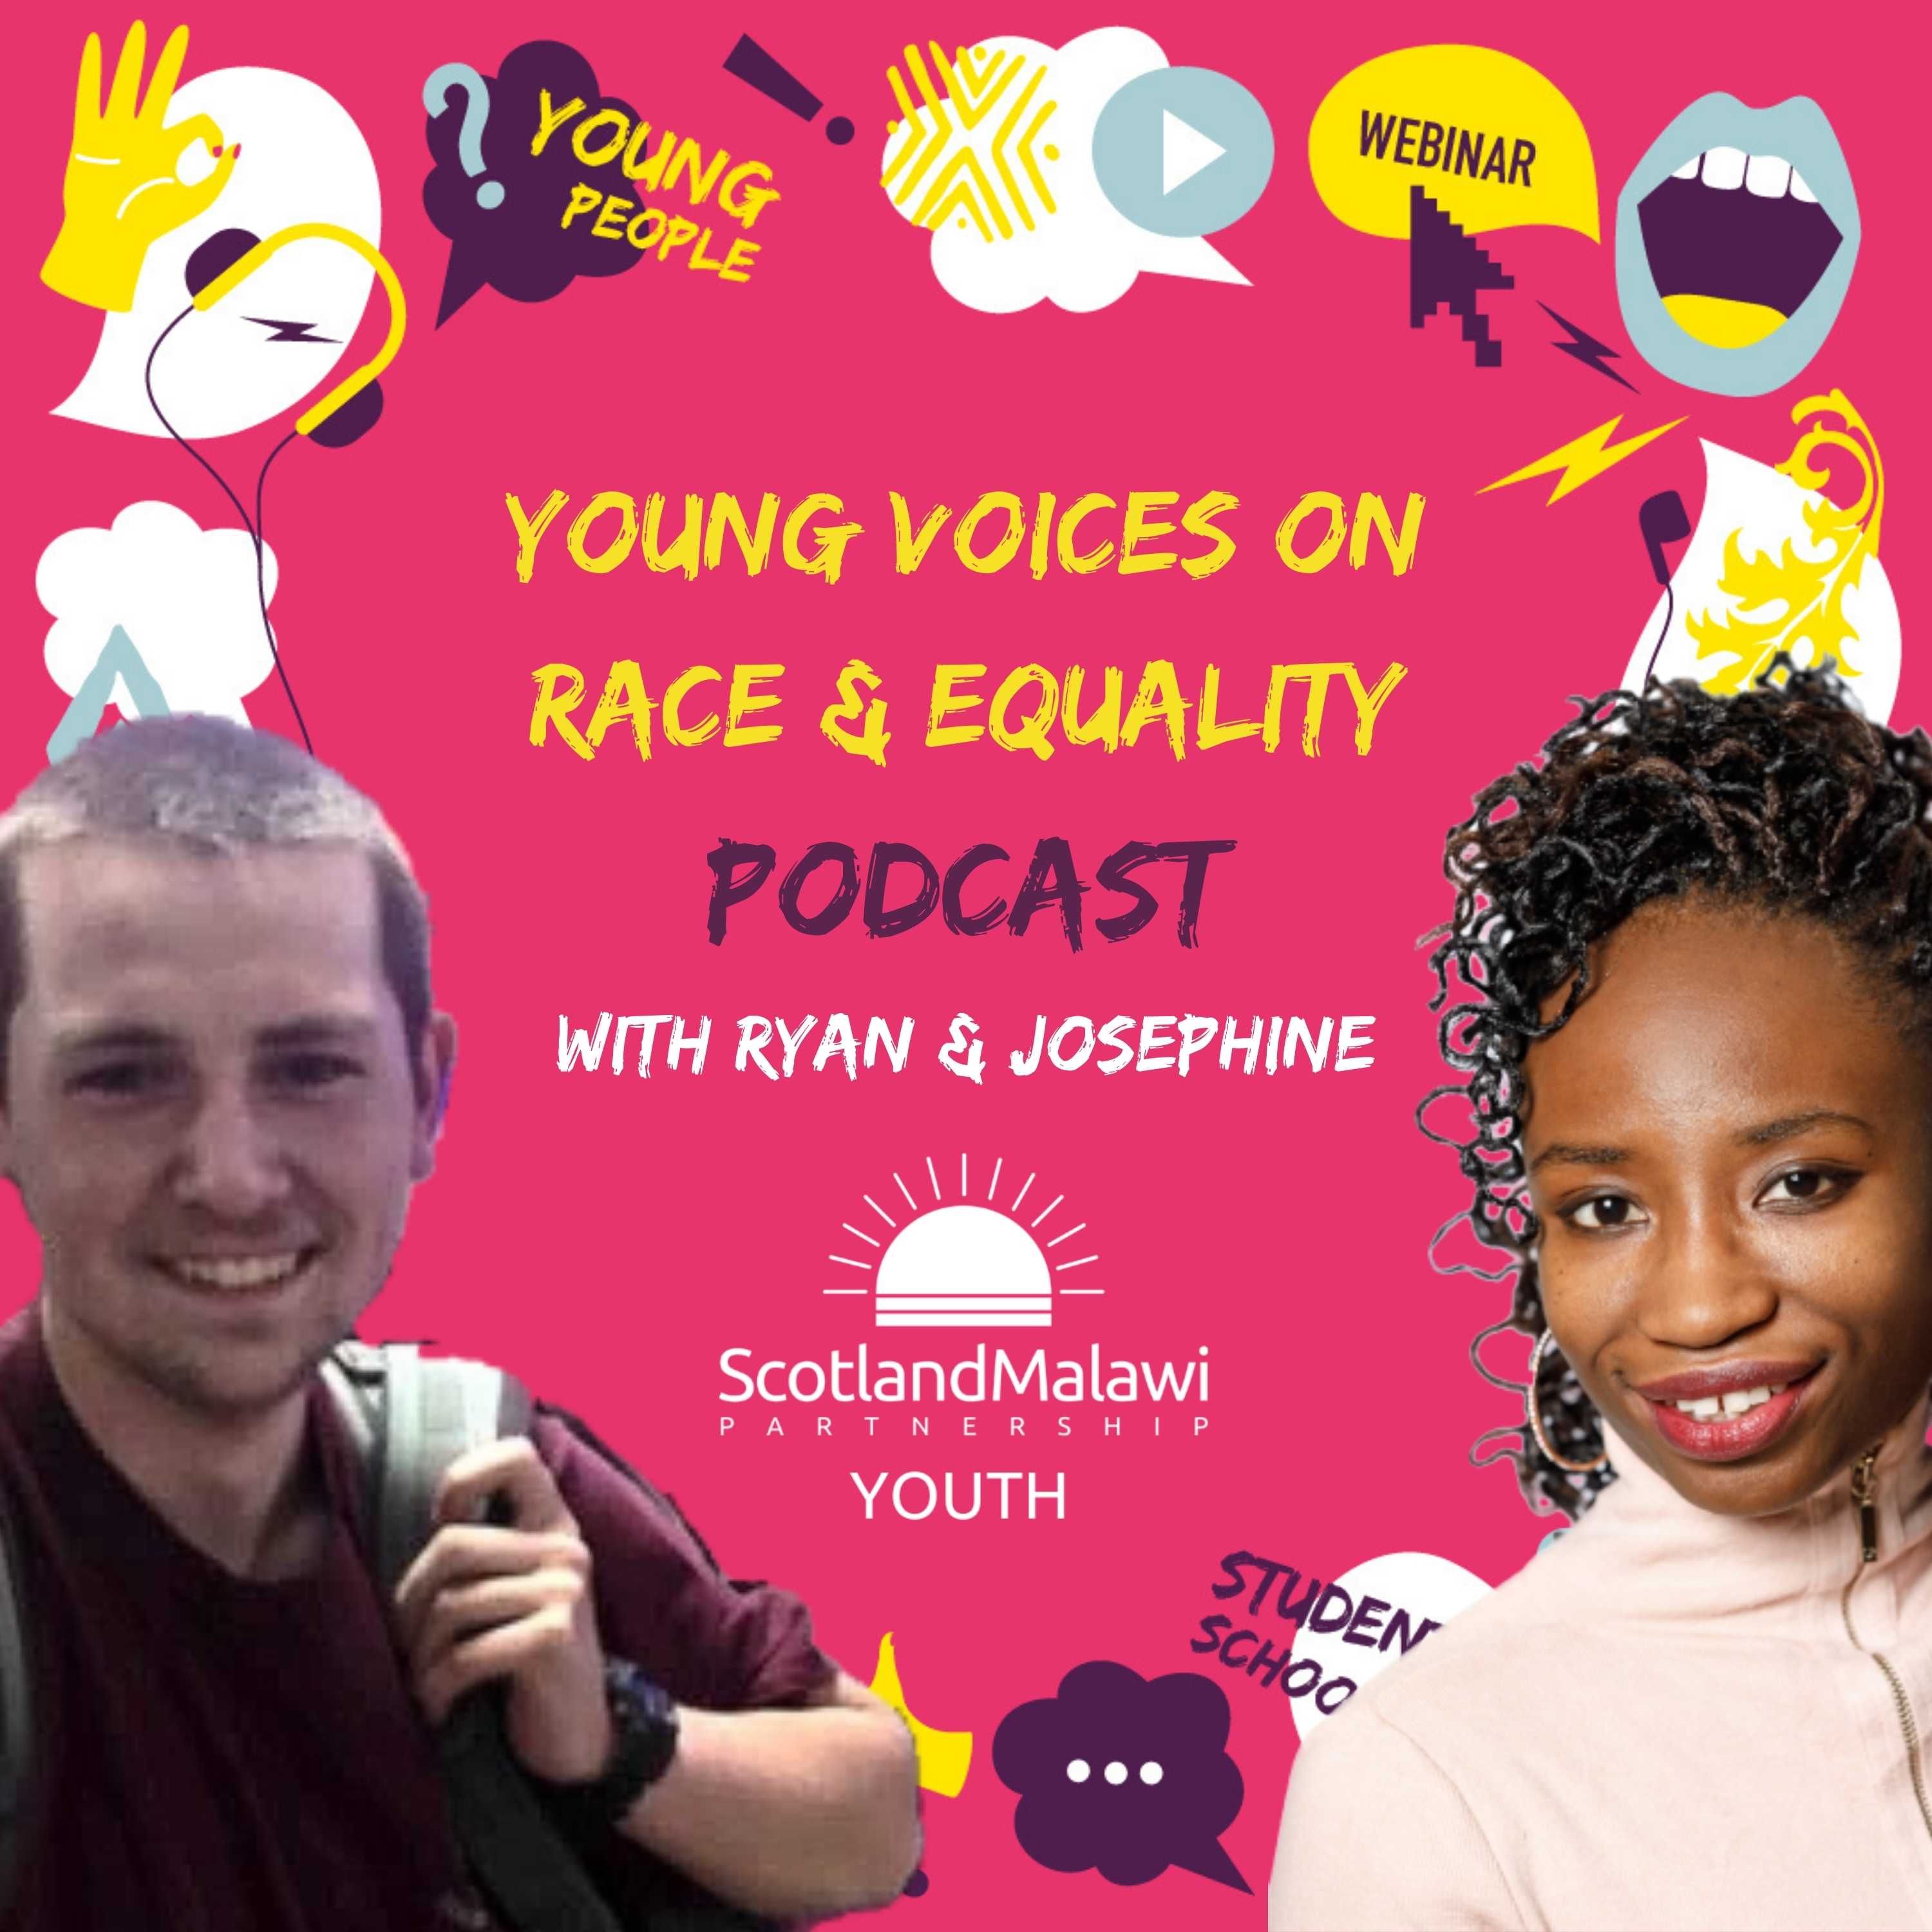 Young Voices on Race & Equality with Ryan and Josephine podcast